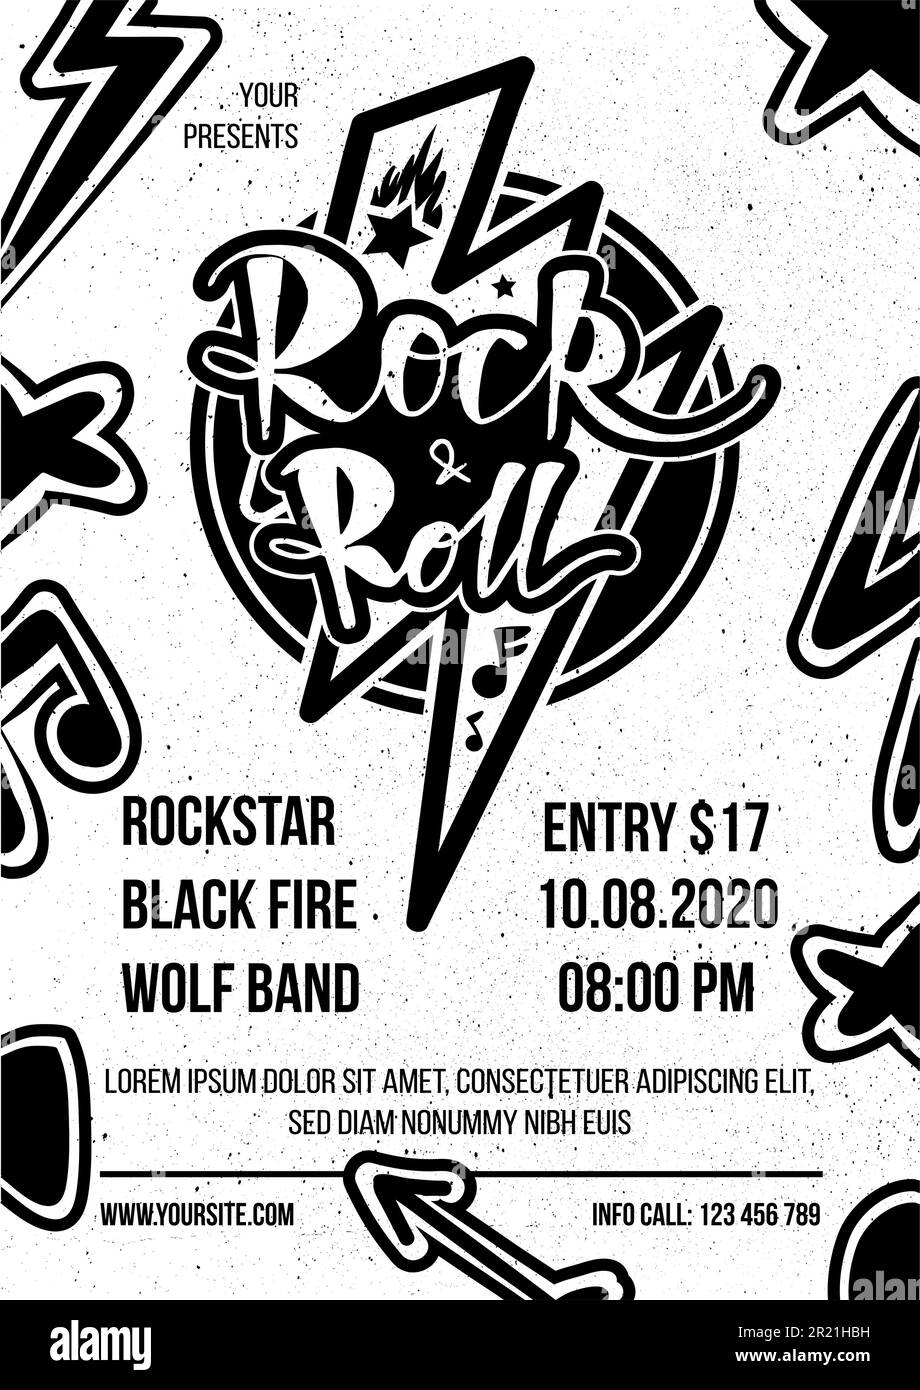 Rock and roll advertising monochrome poster vector. Rock n roll show announcement vintage banner, music label, heavy metal band show invitation flyer, Stock Vector